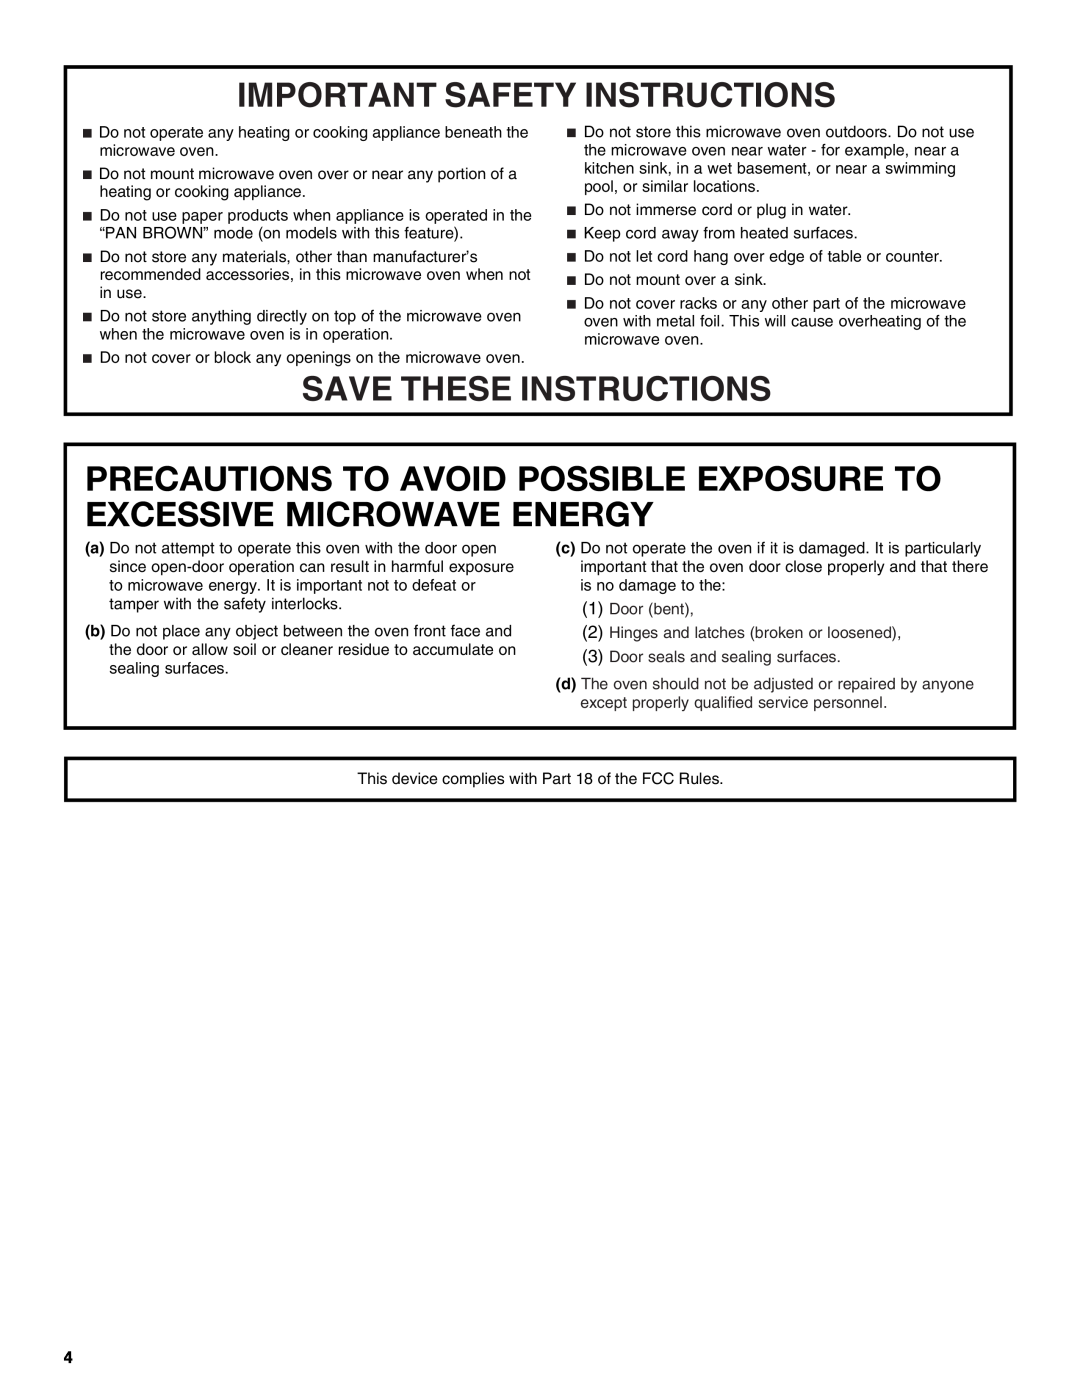 KitchenAid KCMS2055 Precautions To Avoid Possible Exposure To Excessive Microwave Energy, Important Safety Instructions 